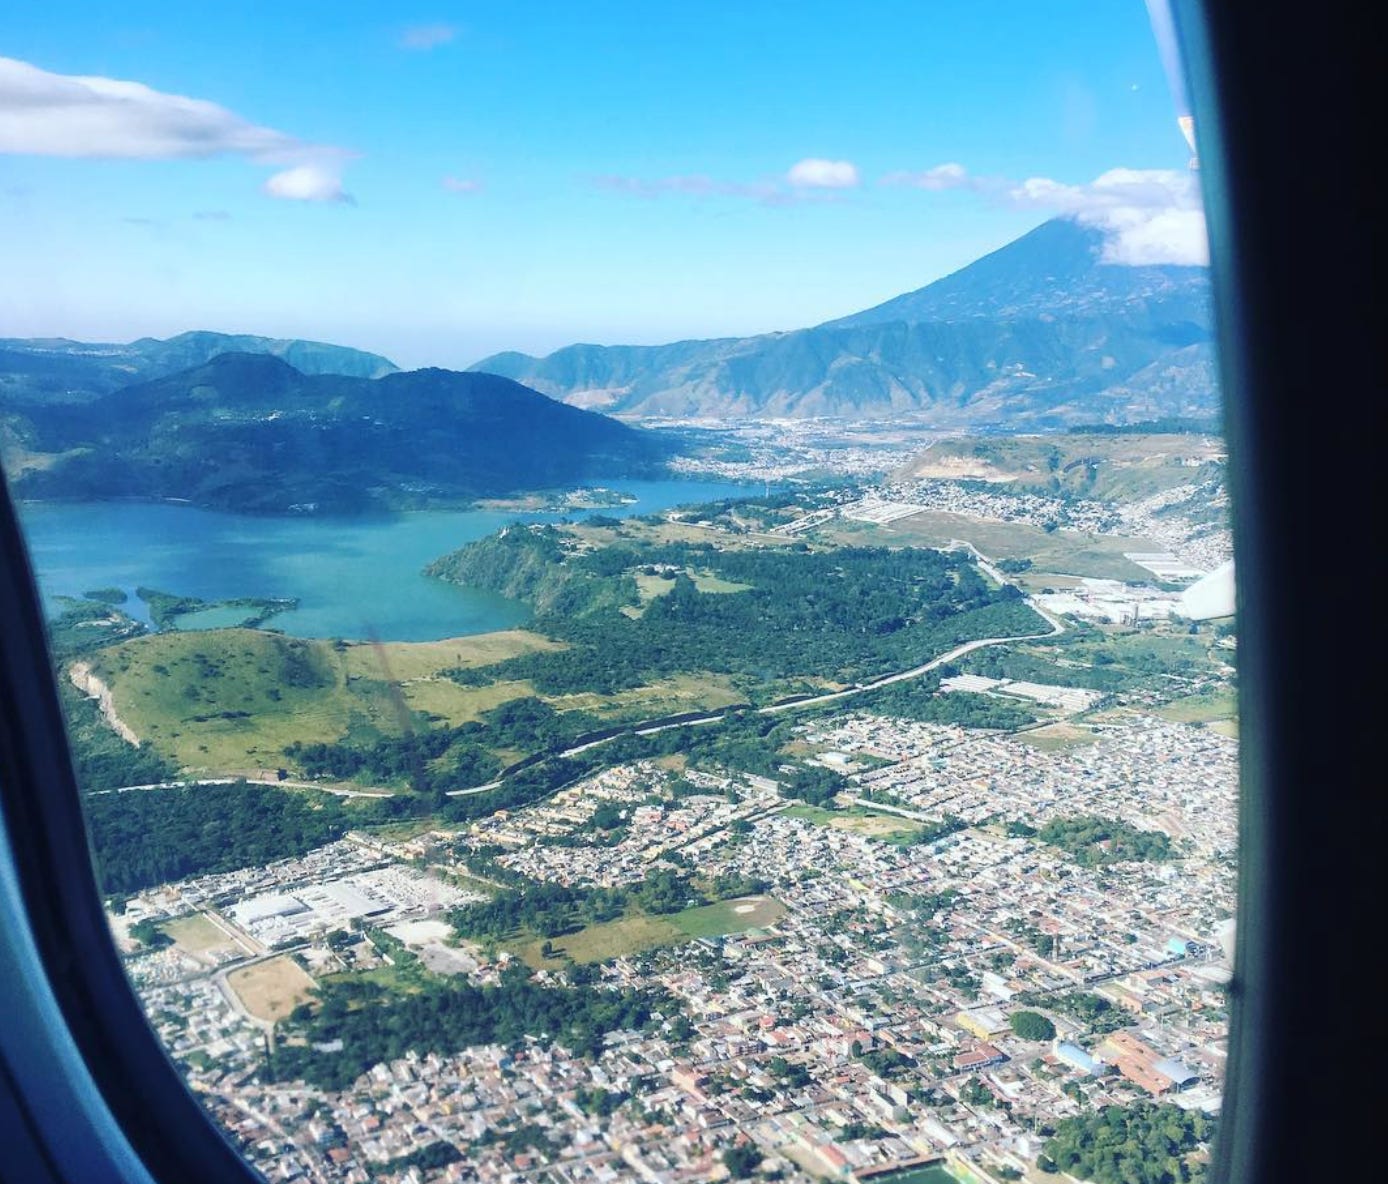 The view through an airplane window of Guatemala City with the water and mountains in the background.